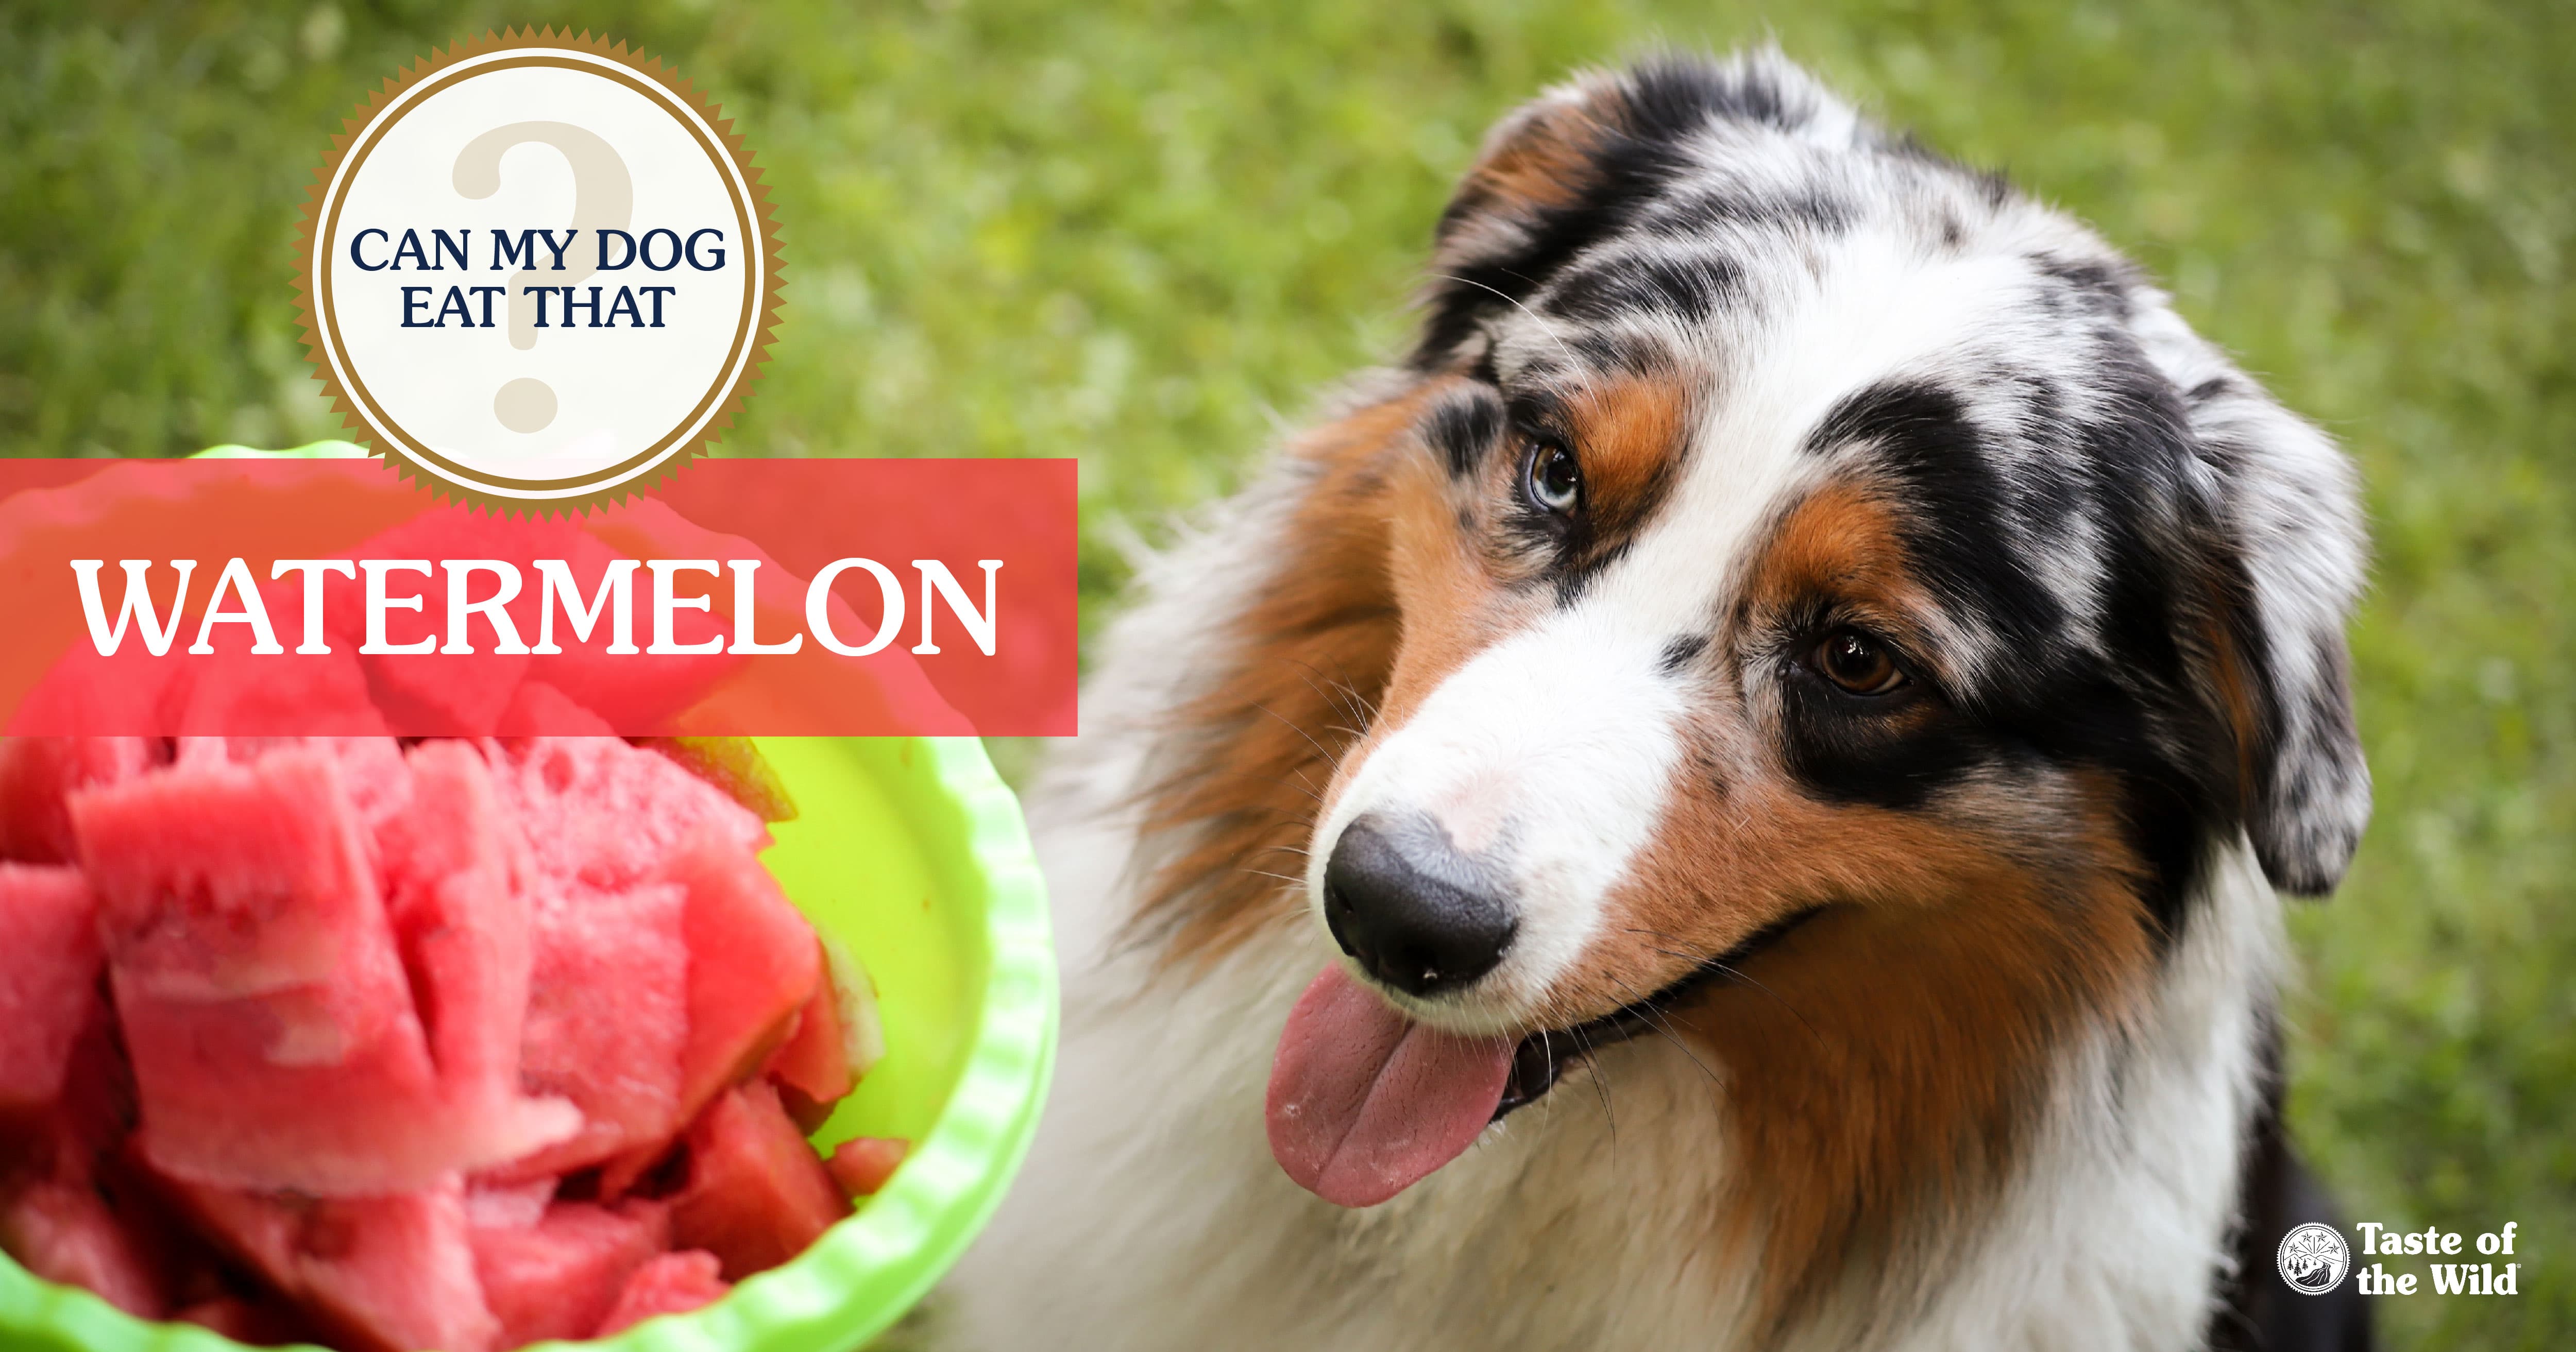 A dog with its tongue out staring at a bowl of watermelon.